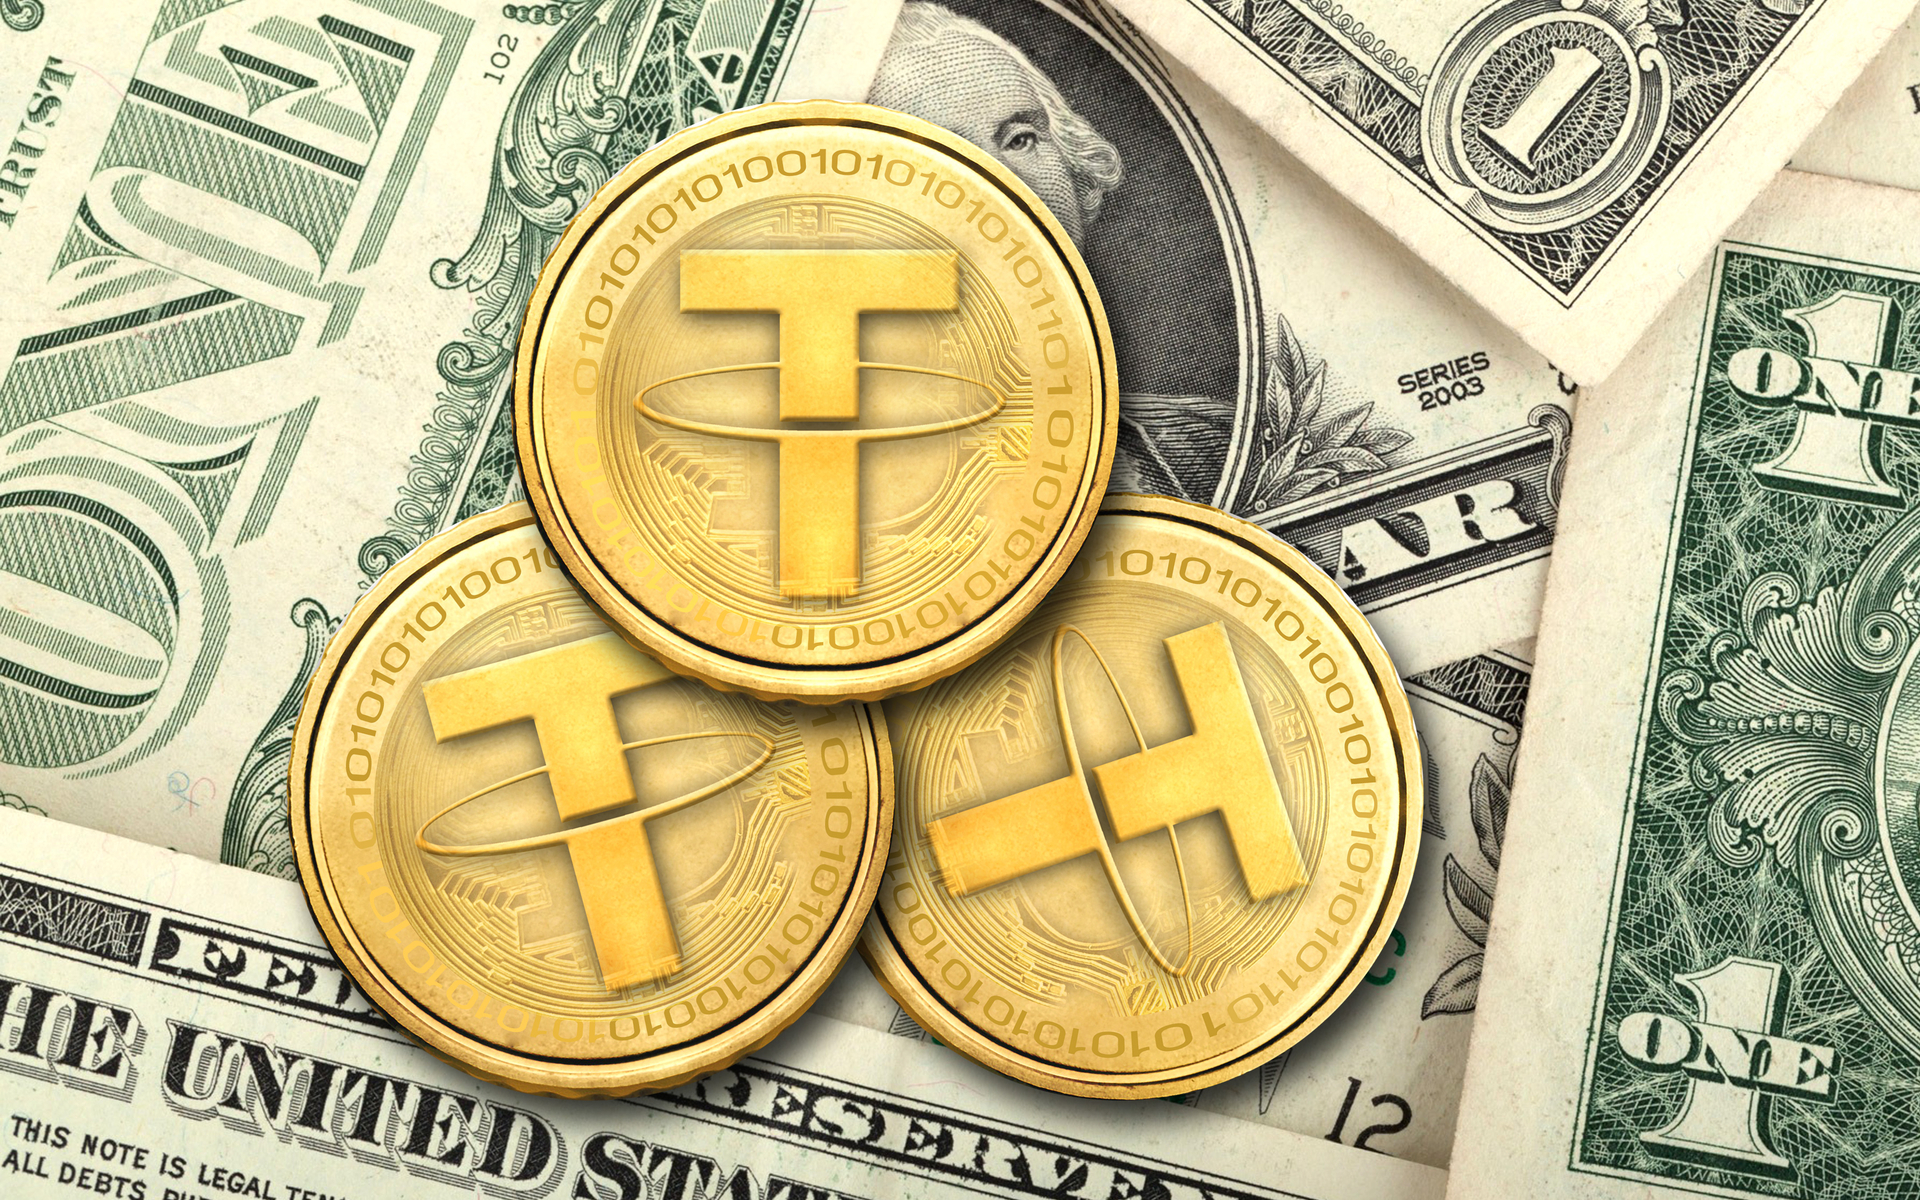 Stablecoin Tether is Fully Backed By Dollars, New Bank Statement Reveals